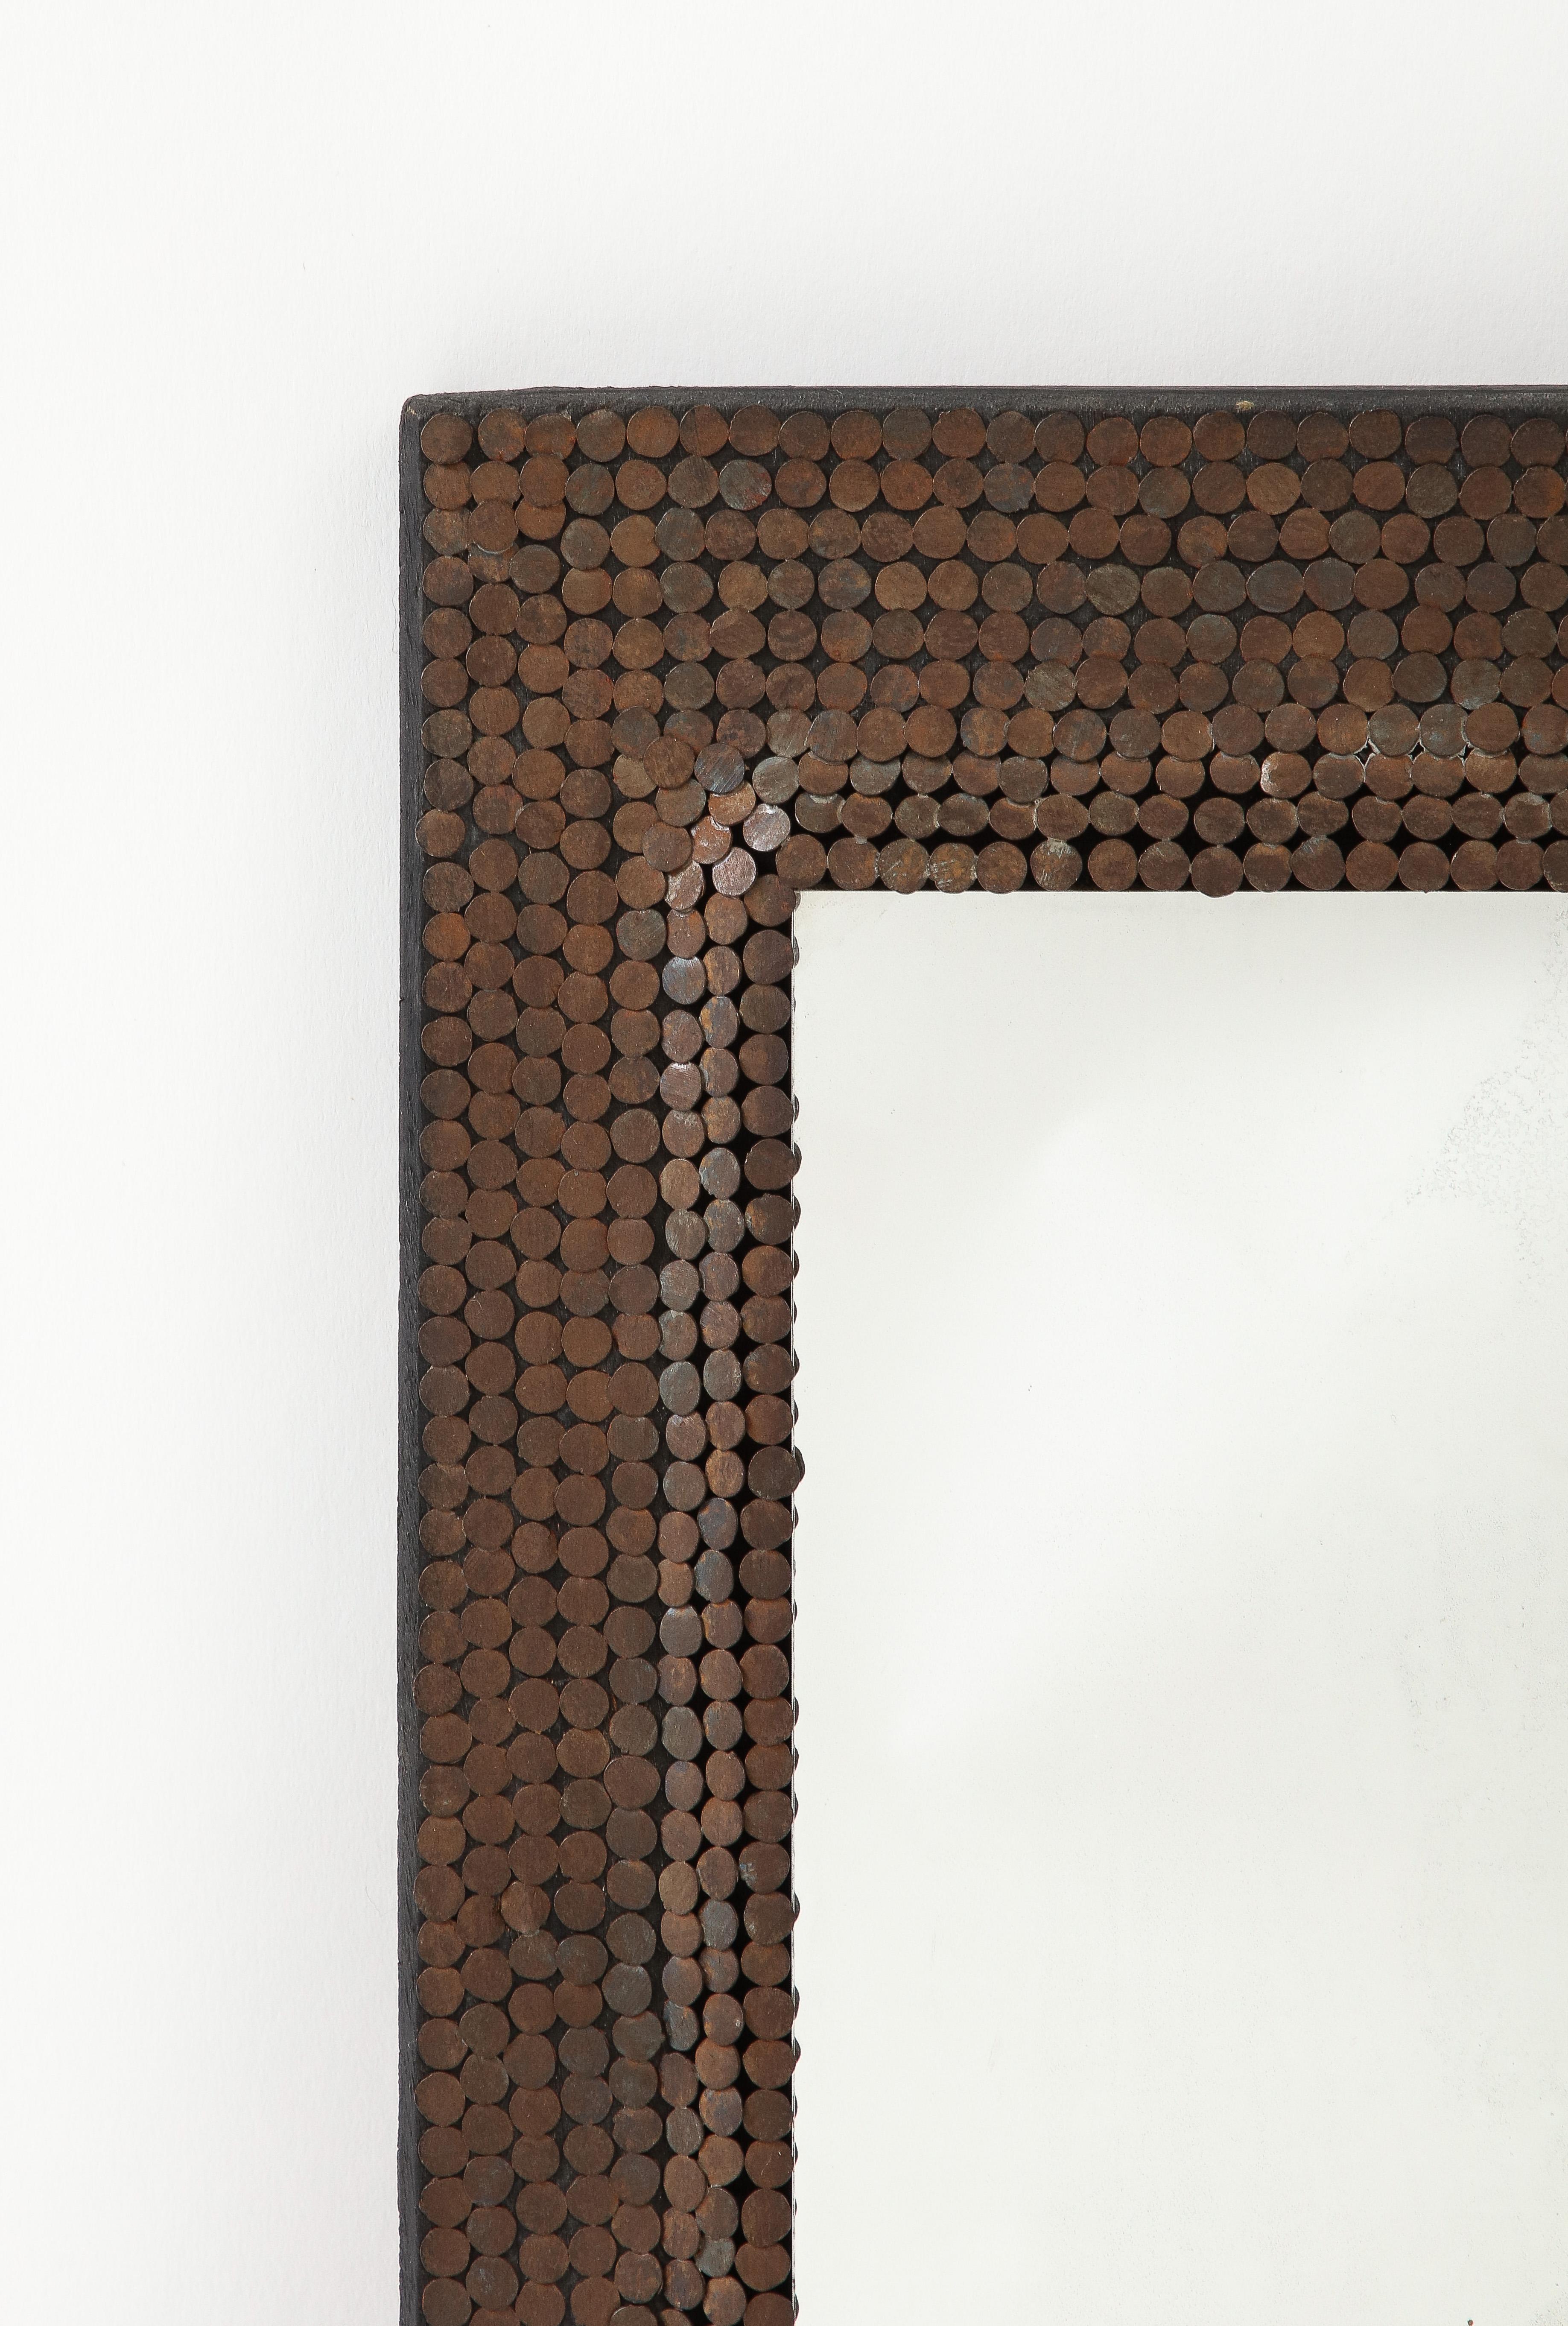 Early 20th Century Early 20th C. Hand Made Mirror Studded with Nails, France For Sale